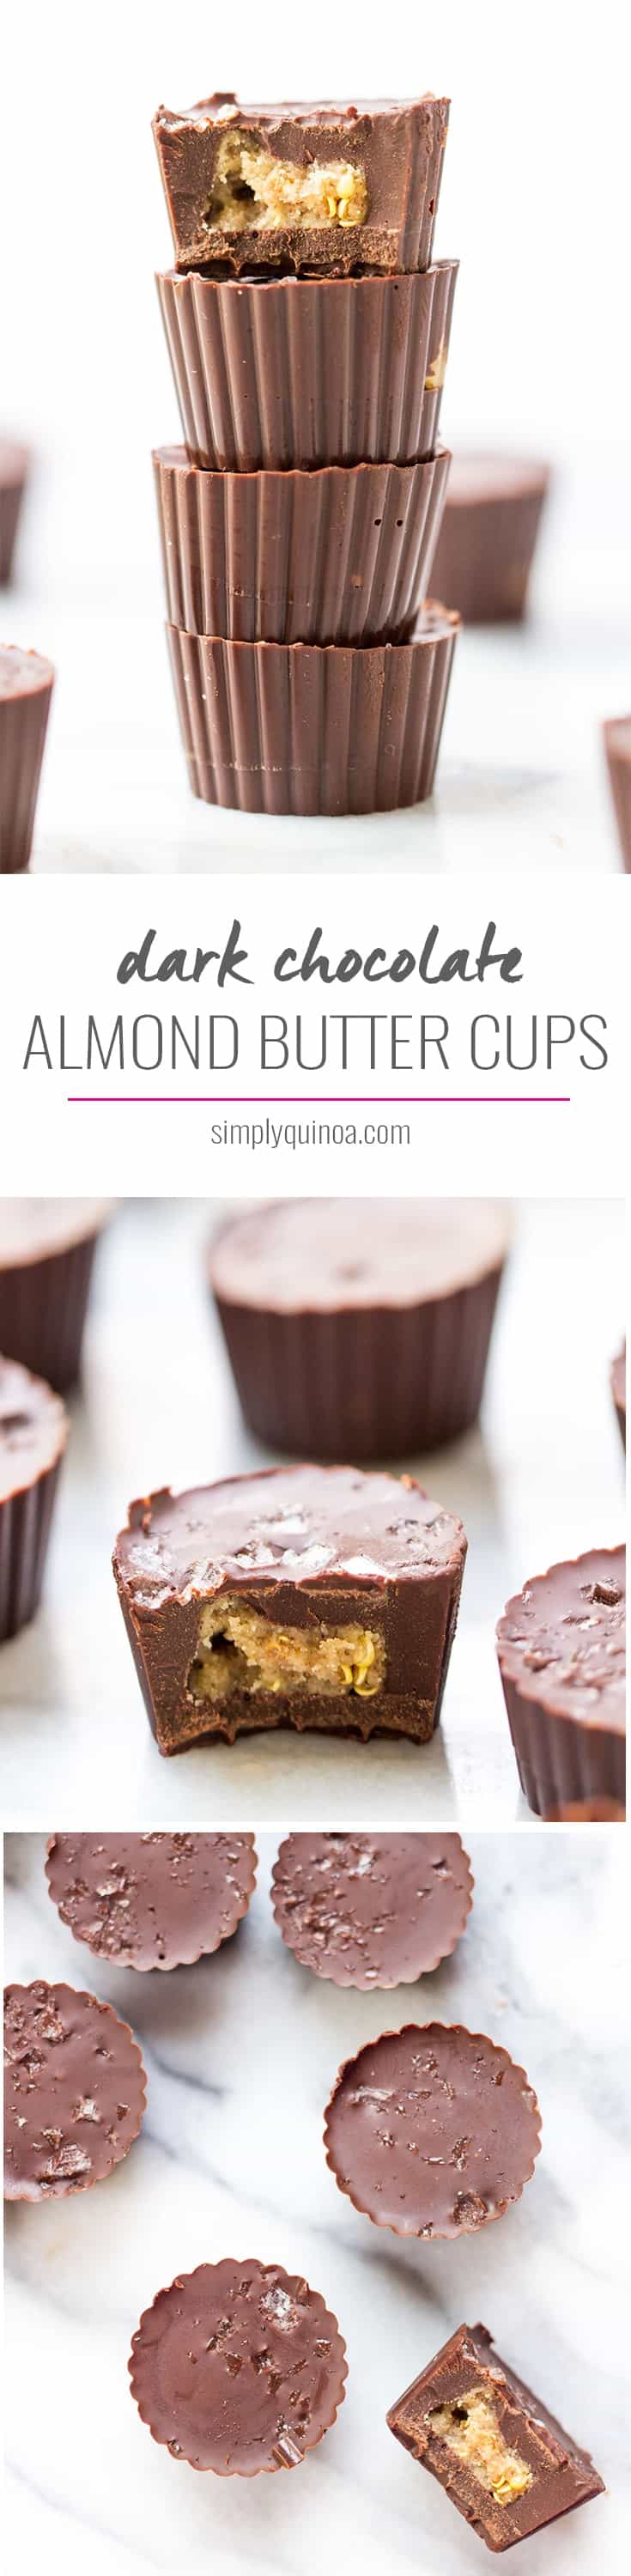 Dark Chocolate Almond Butter Cups -- a decadent sweet treat that is simple to make and HEALTHY! [vegan]